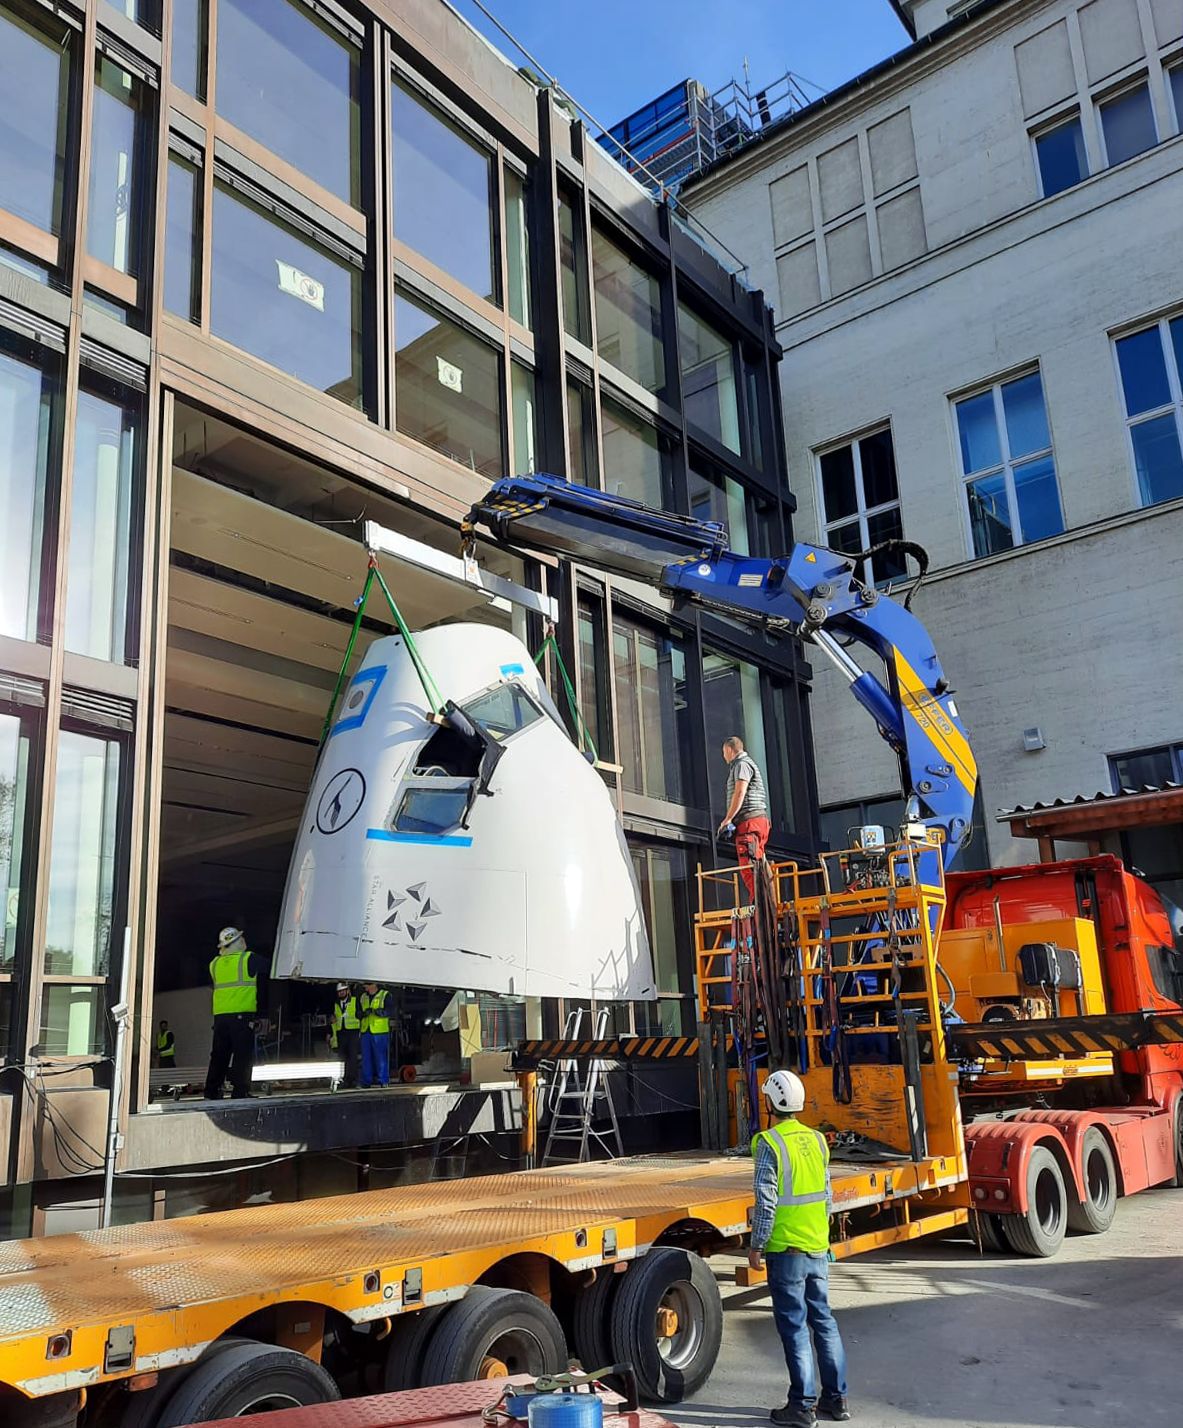 OIA’s transport team helped the Deutsche Museum in Munich create a fascinating exhibit on modern aviation. Transportation management included cutting a 2MT cockpit out of an Airbus 320 plane, packing and loading it onto a truck, and transporting it 2,000 kilometers from Spain to Germany. 